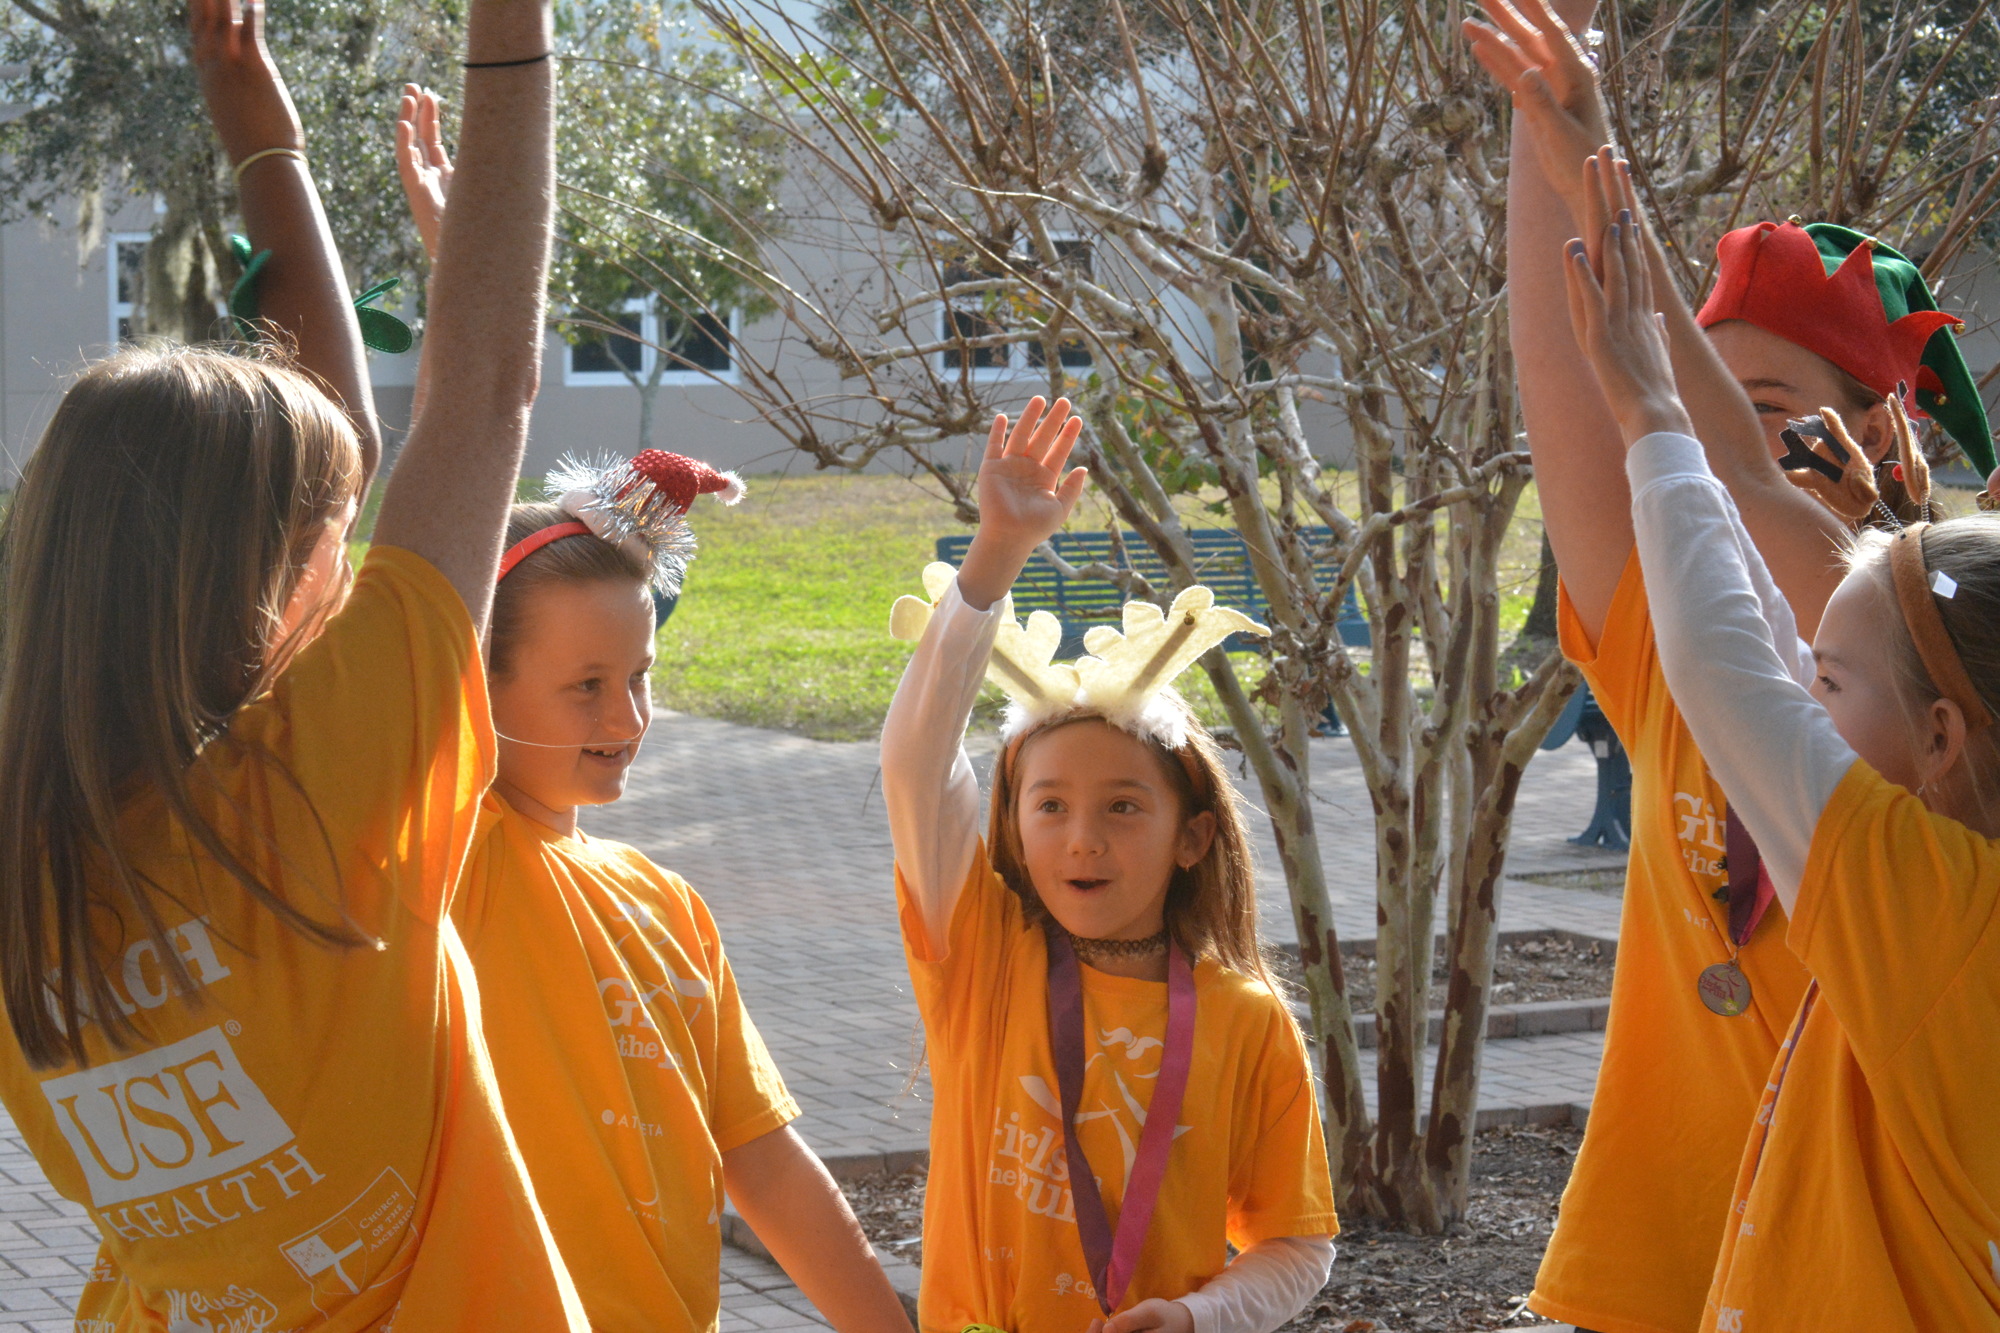 The Phillippi Shores chapter of Girls on the Run breaks it down.